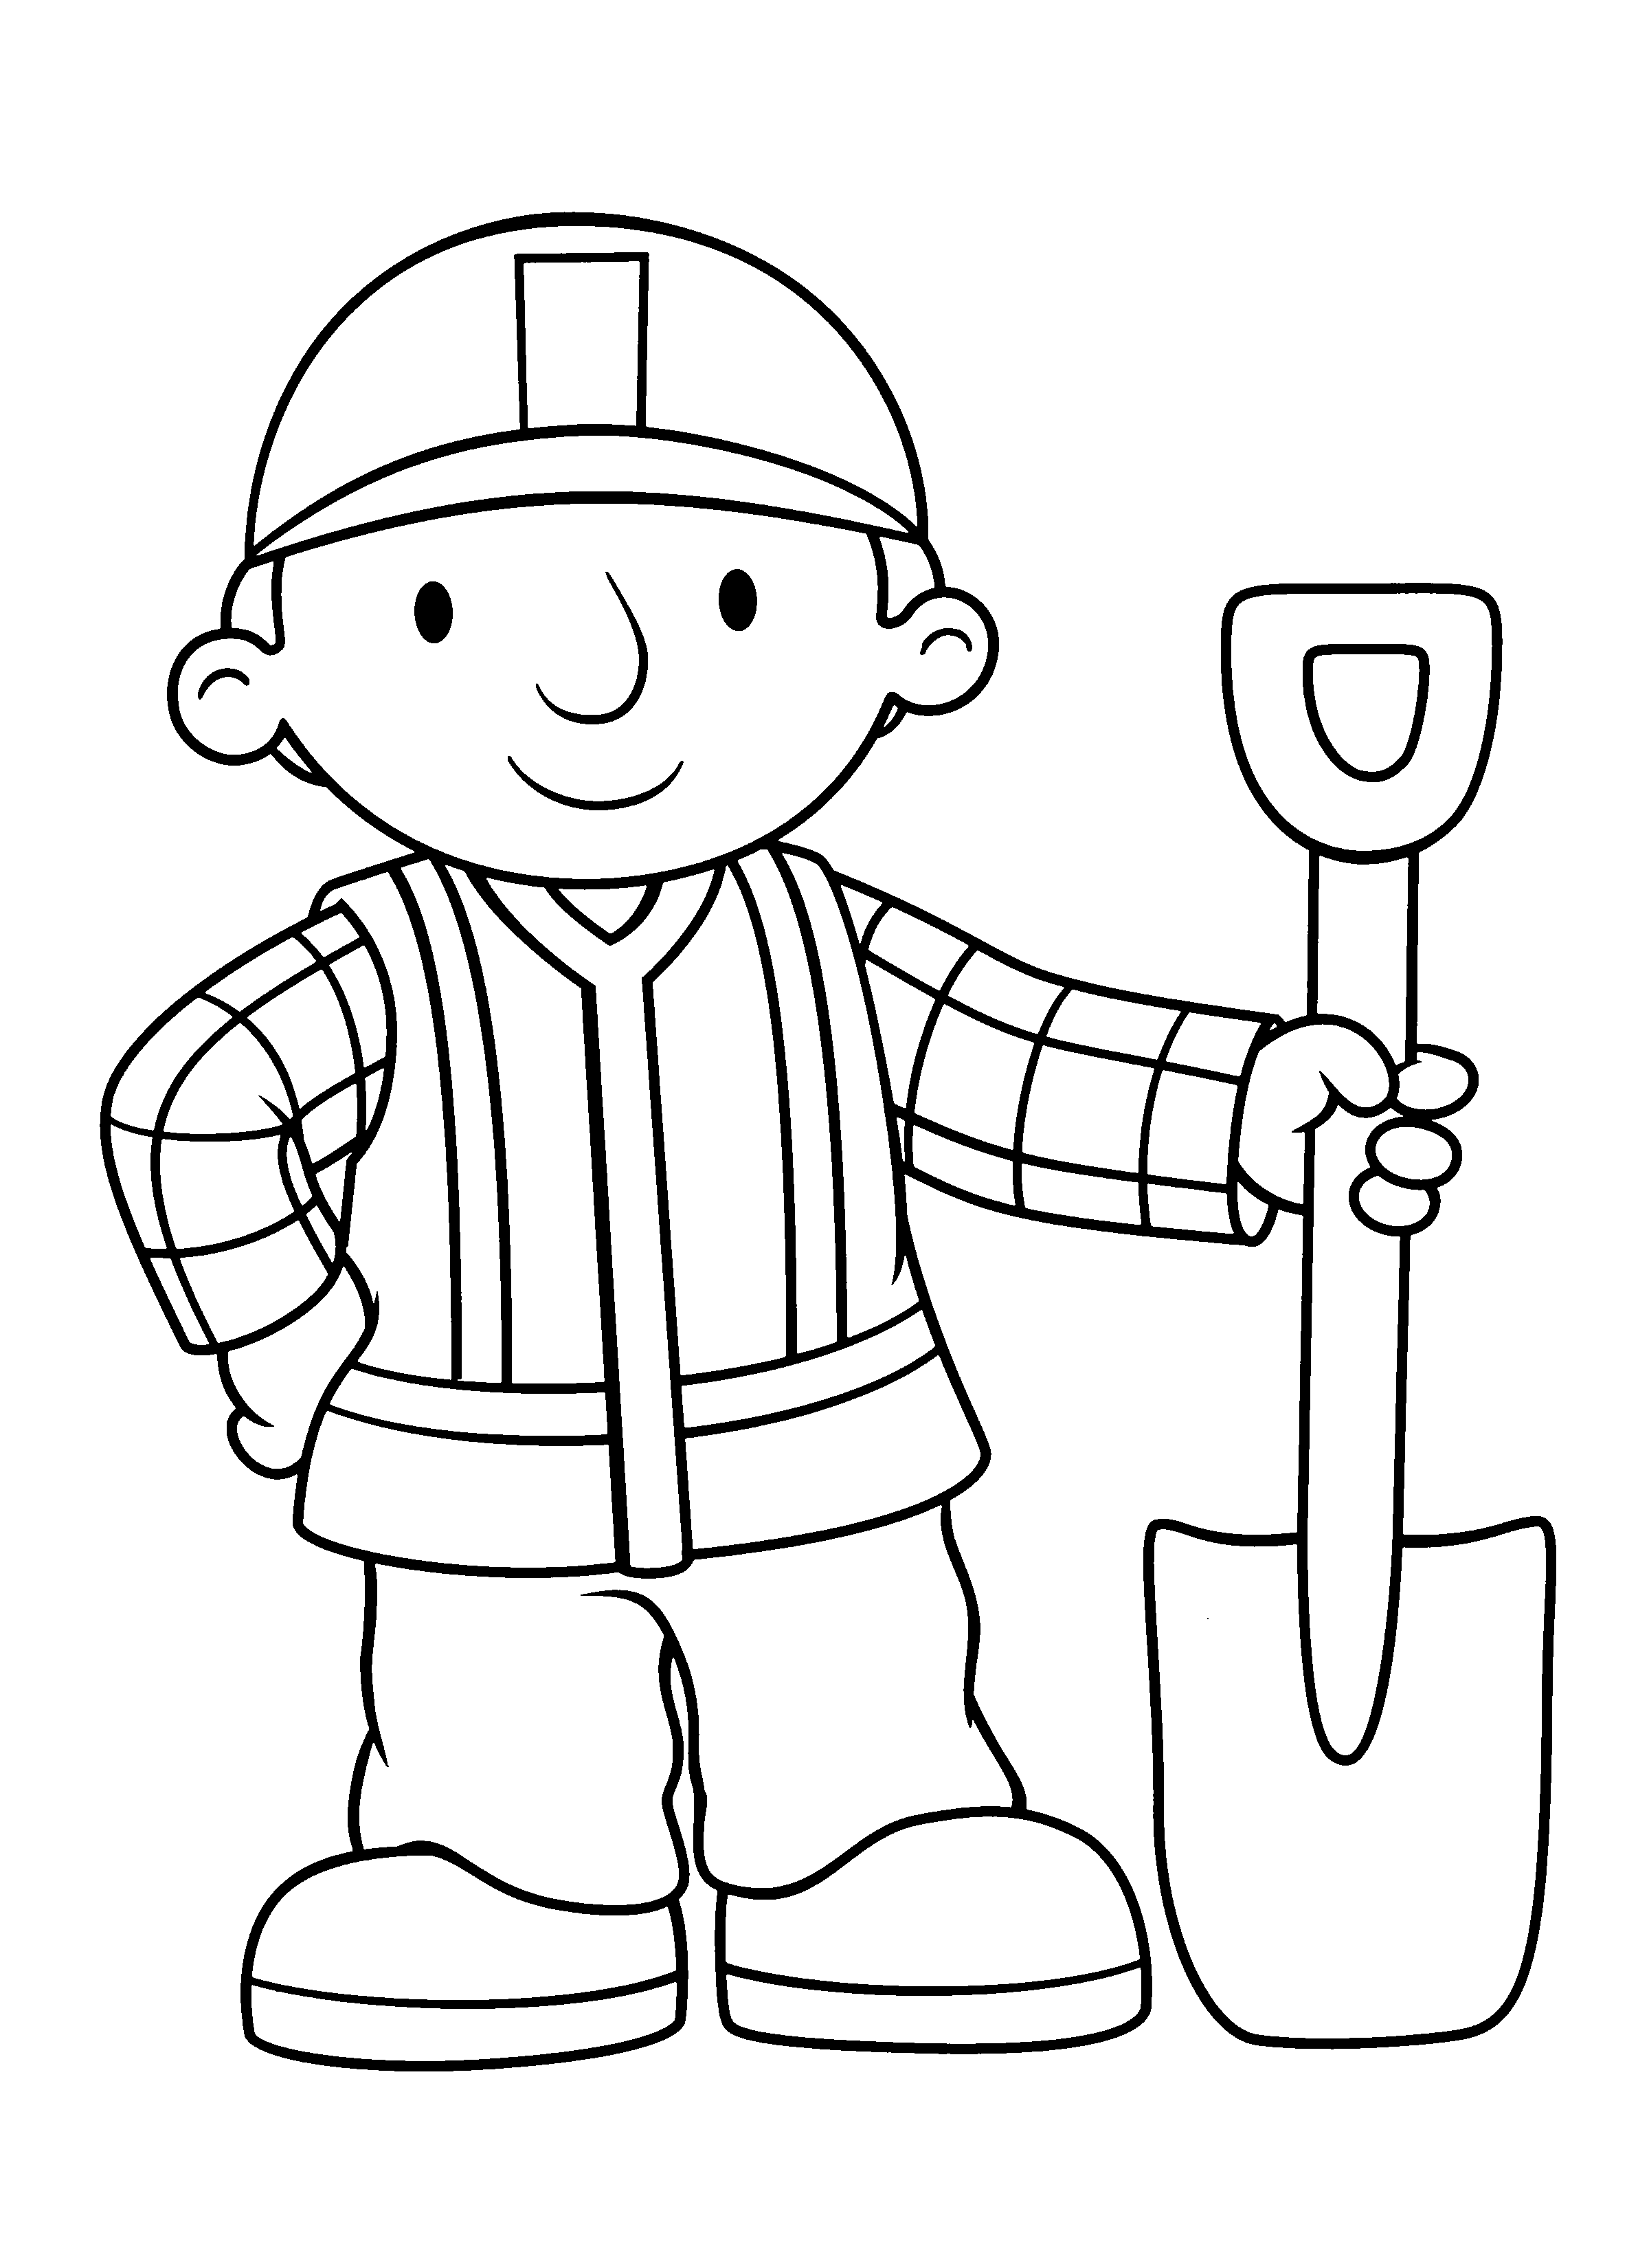 animated-coloring-pages-bob-the-builder-image-0088